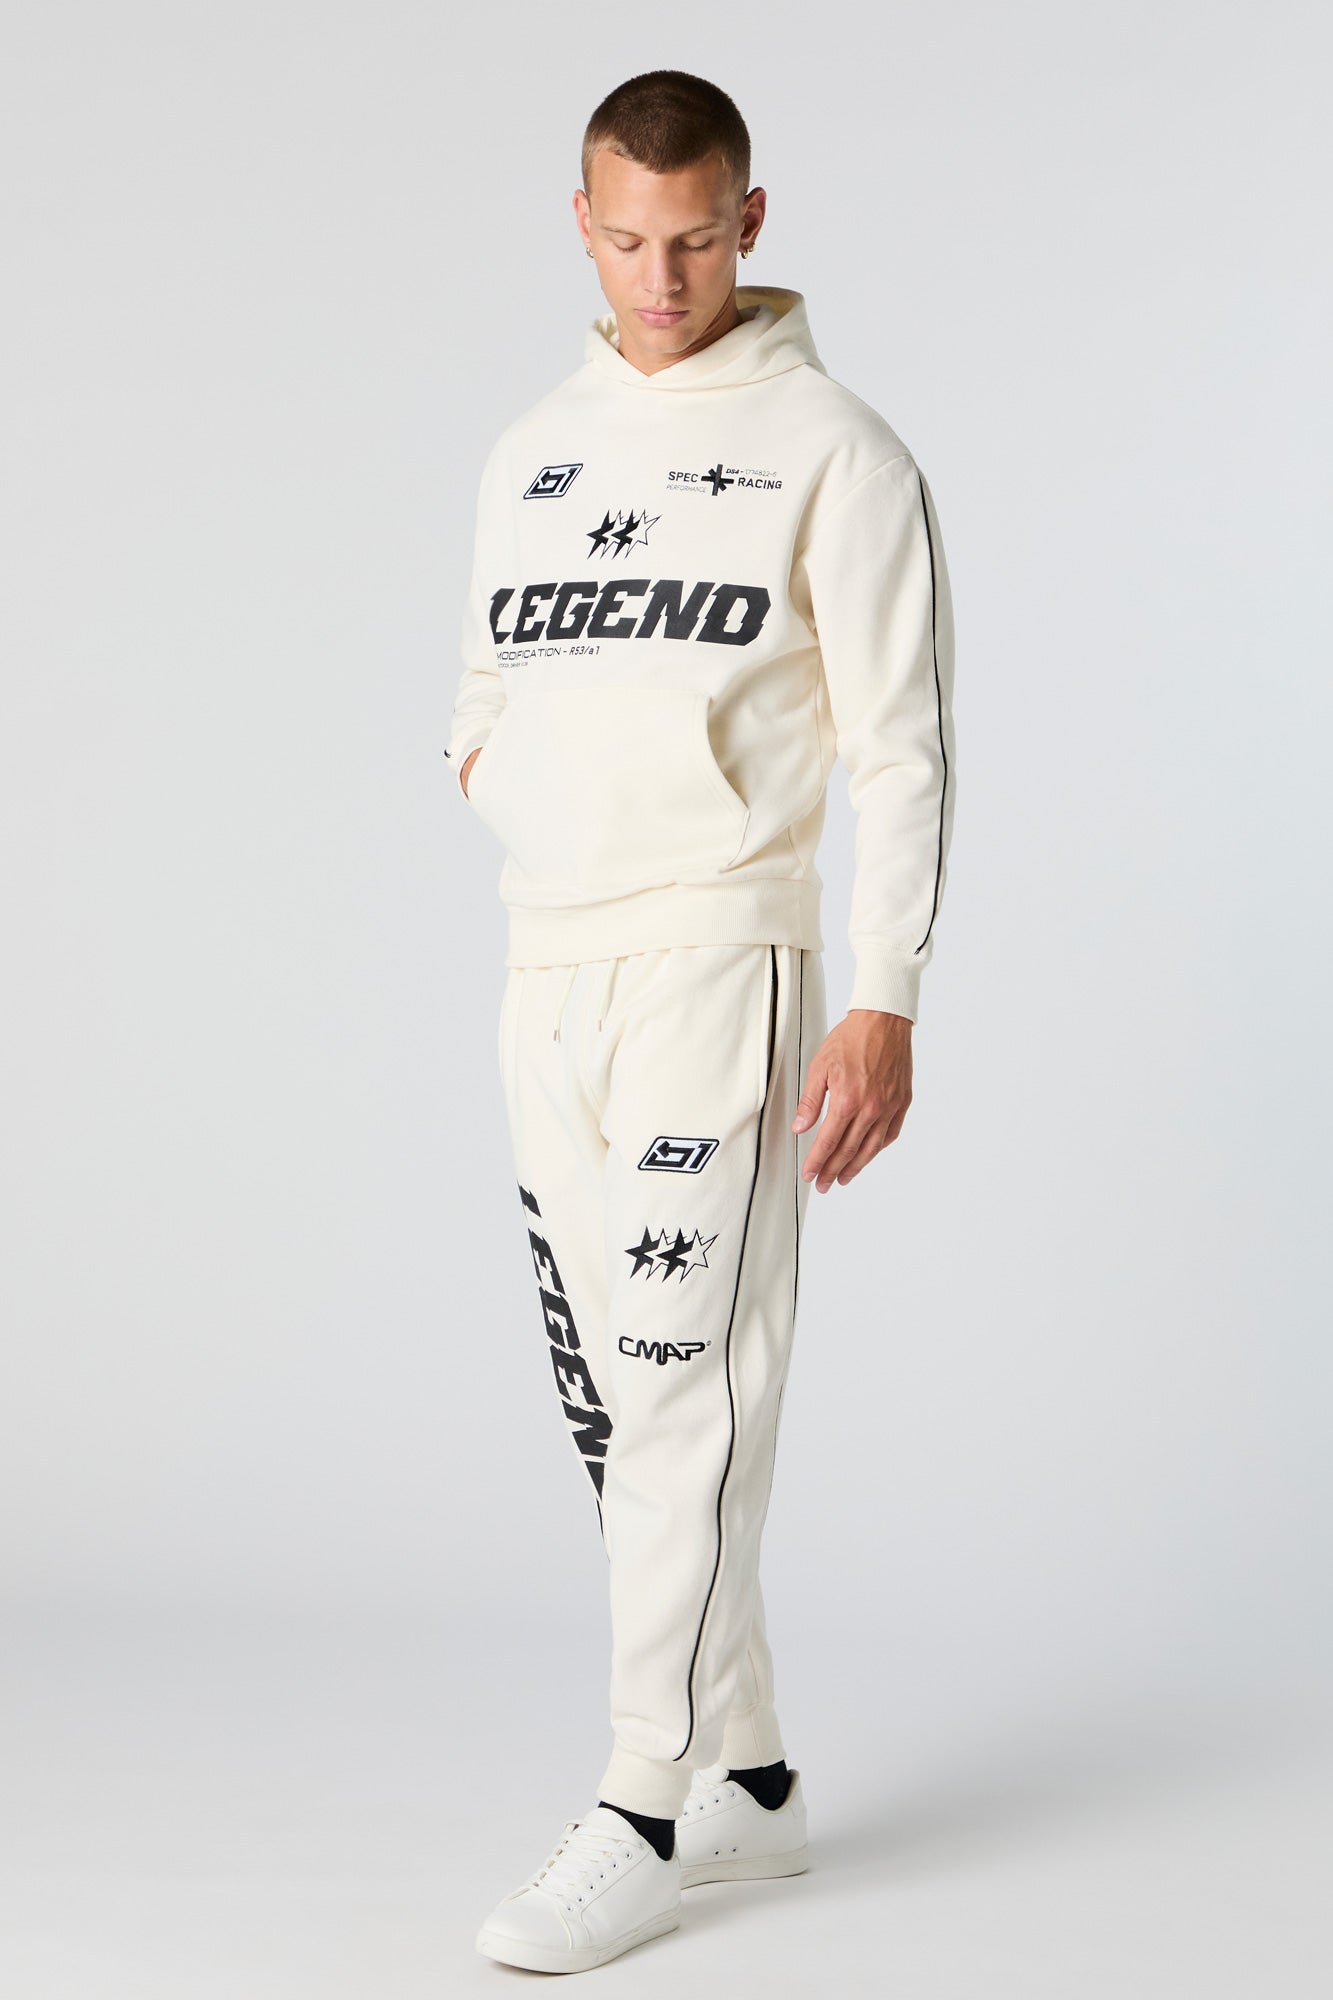 Racing Legend Embroidered Graphic Fleece Jogger